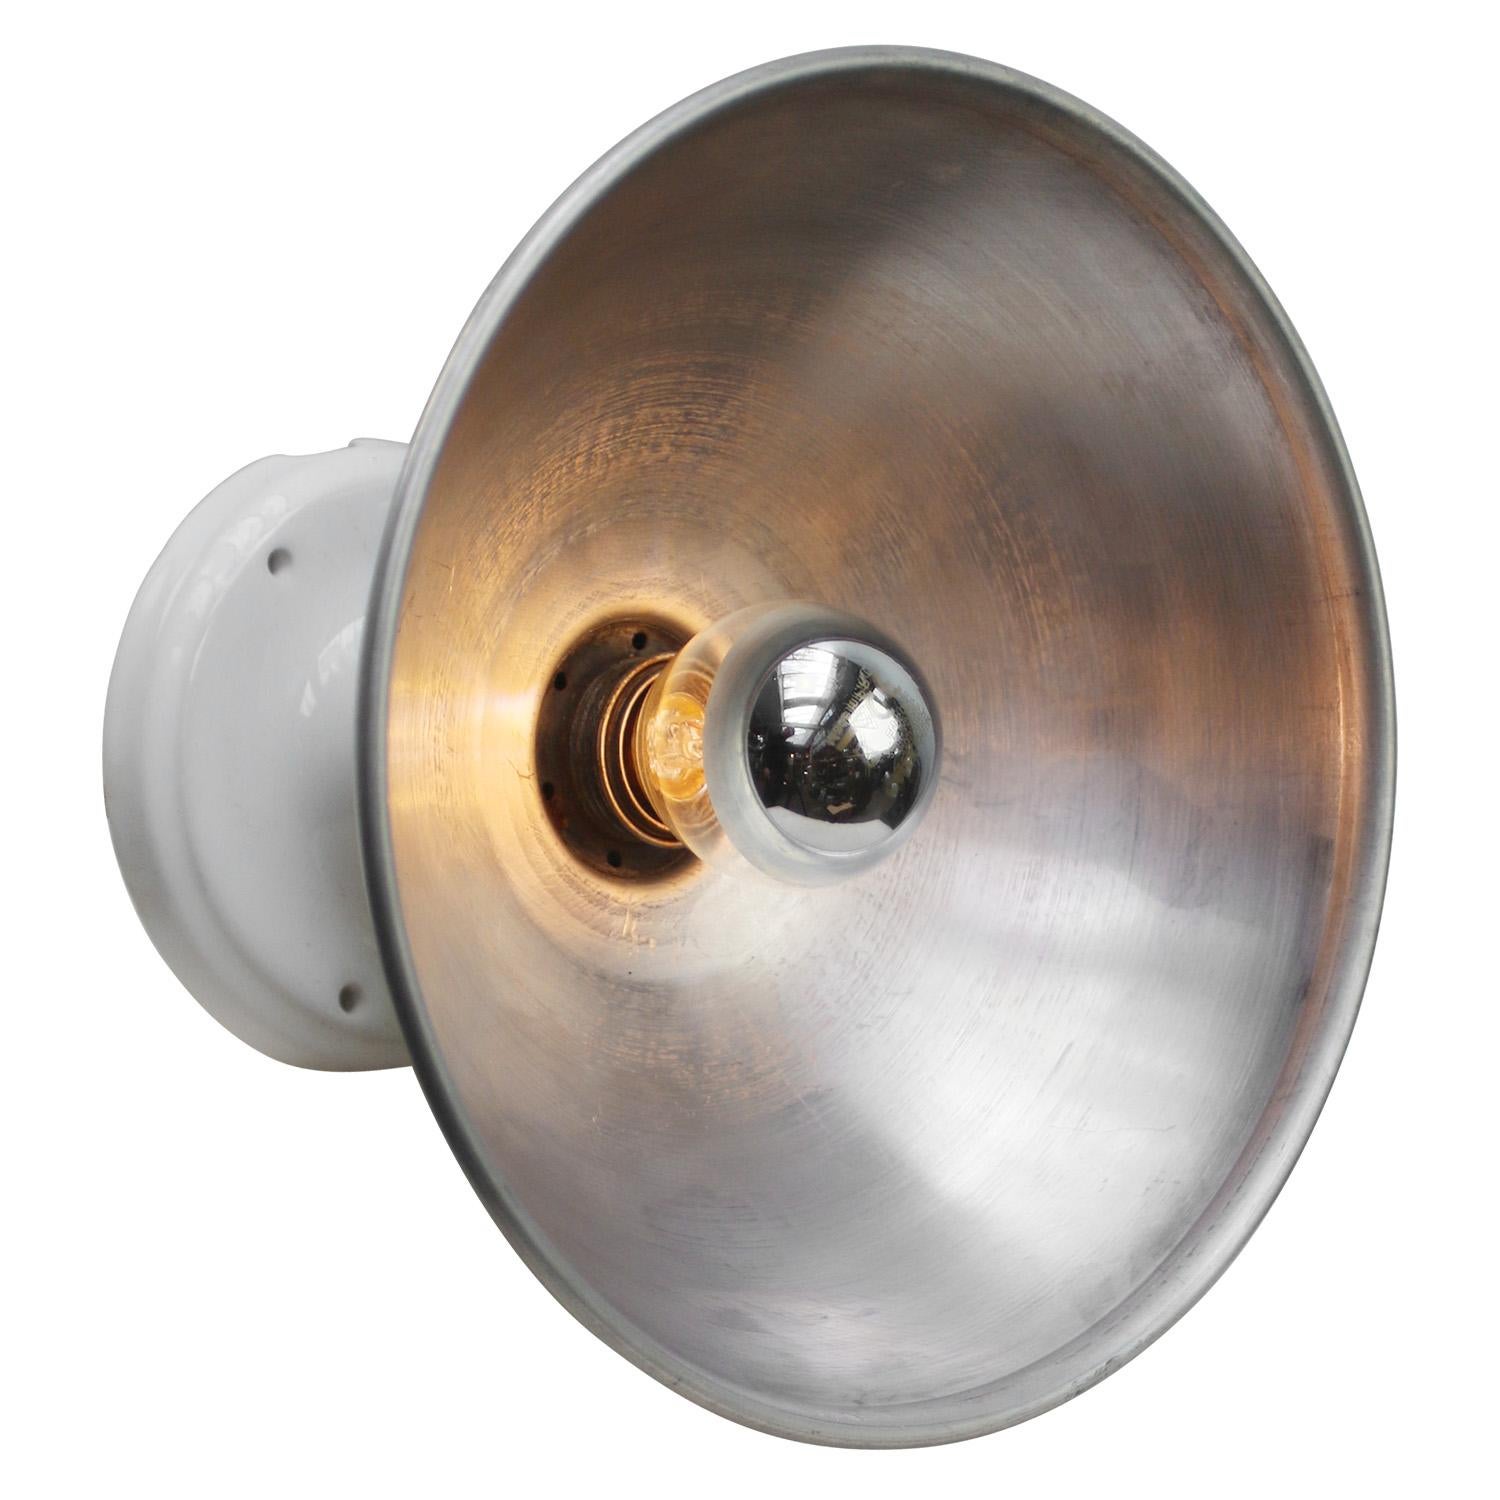 Round Metal Scone wall Lamp
metal scone / wall lamp / ceiling light
Porcelain wall piece. Diameter 10 cm / 3.9”

E14 bulb holder

Weight: 0.50 kg / 1.1 lb

E14 bulb holder. Priced per individual item. All lamps have been made suitable by